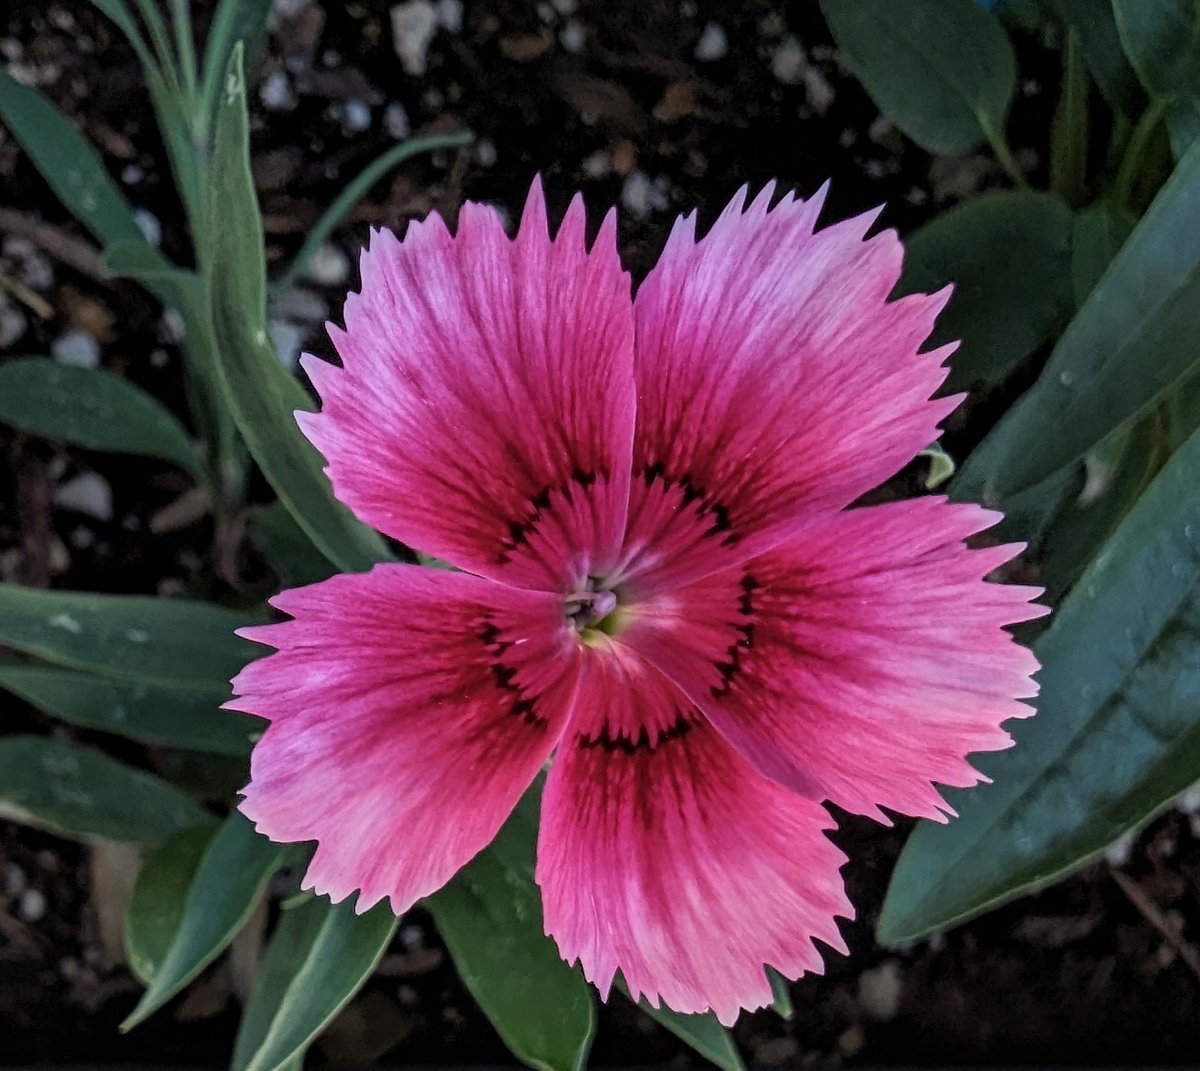 Dianthus blooming today